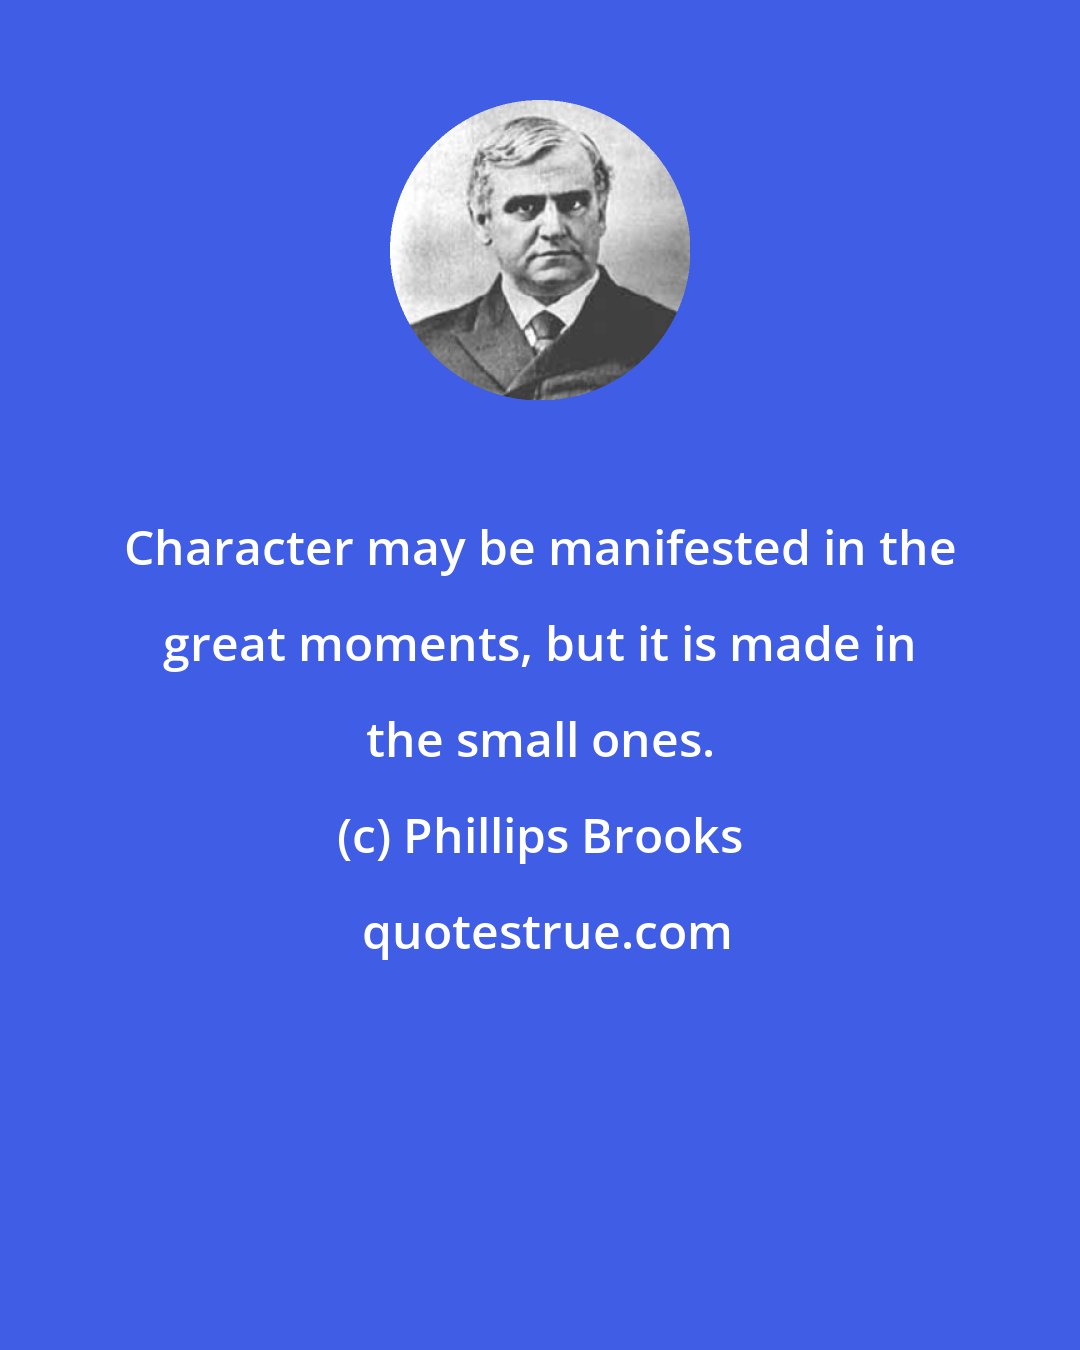 Phillips Brooks: Character may be manifested in the great moments, but it is made in the small ones.